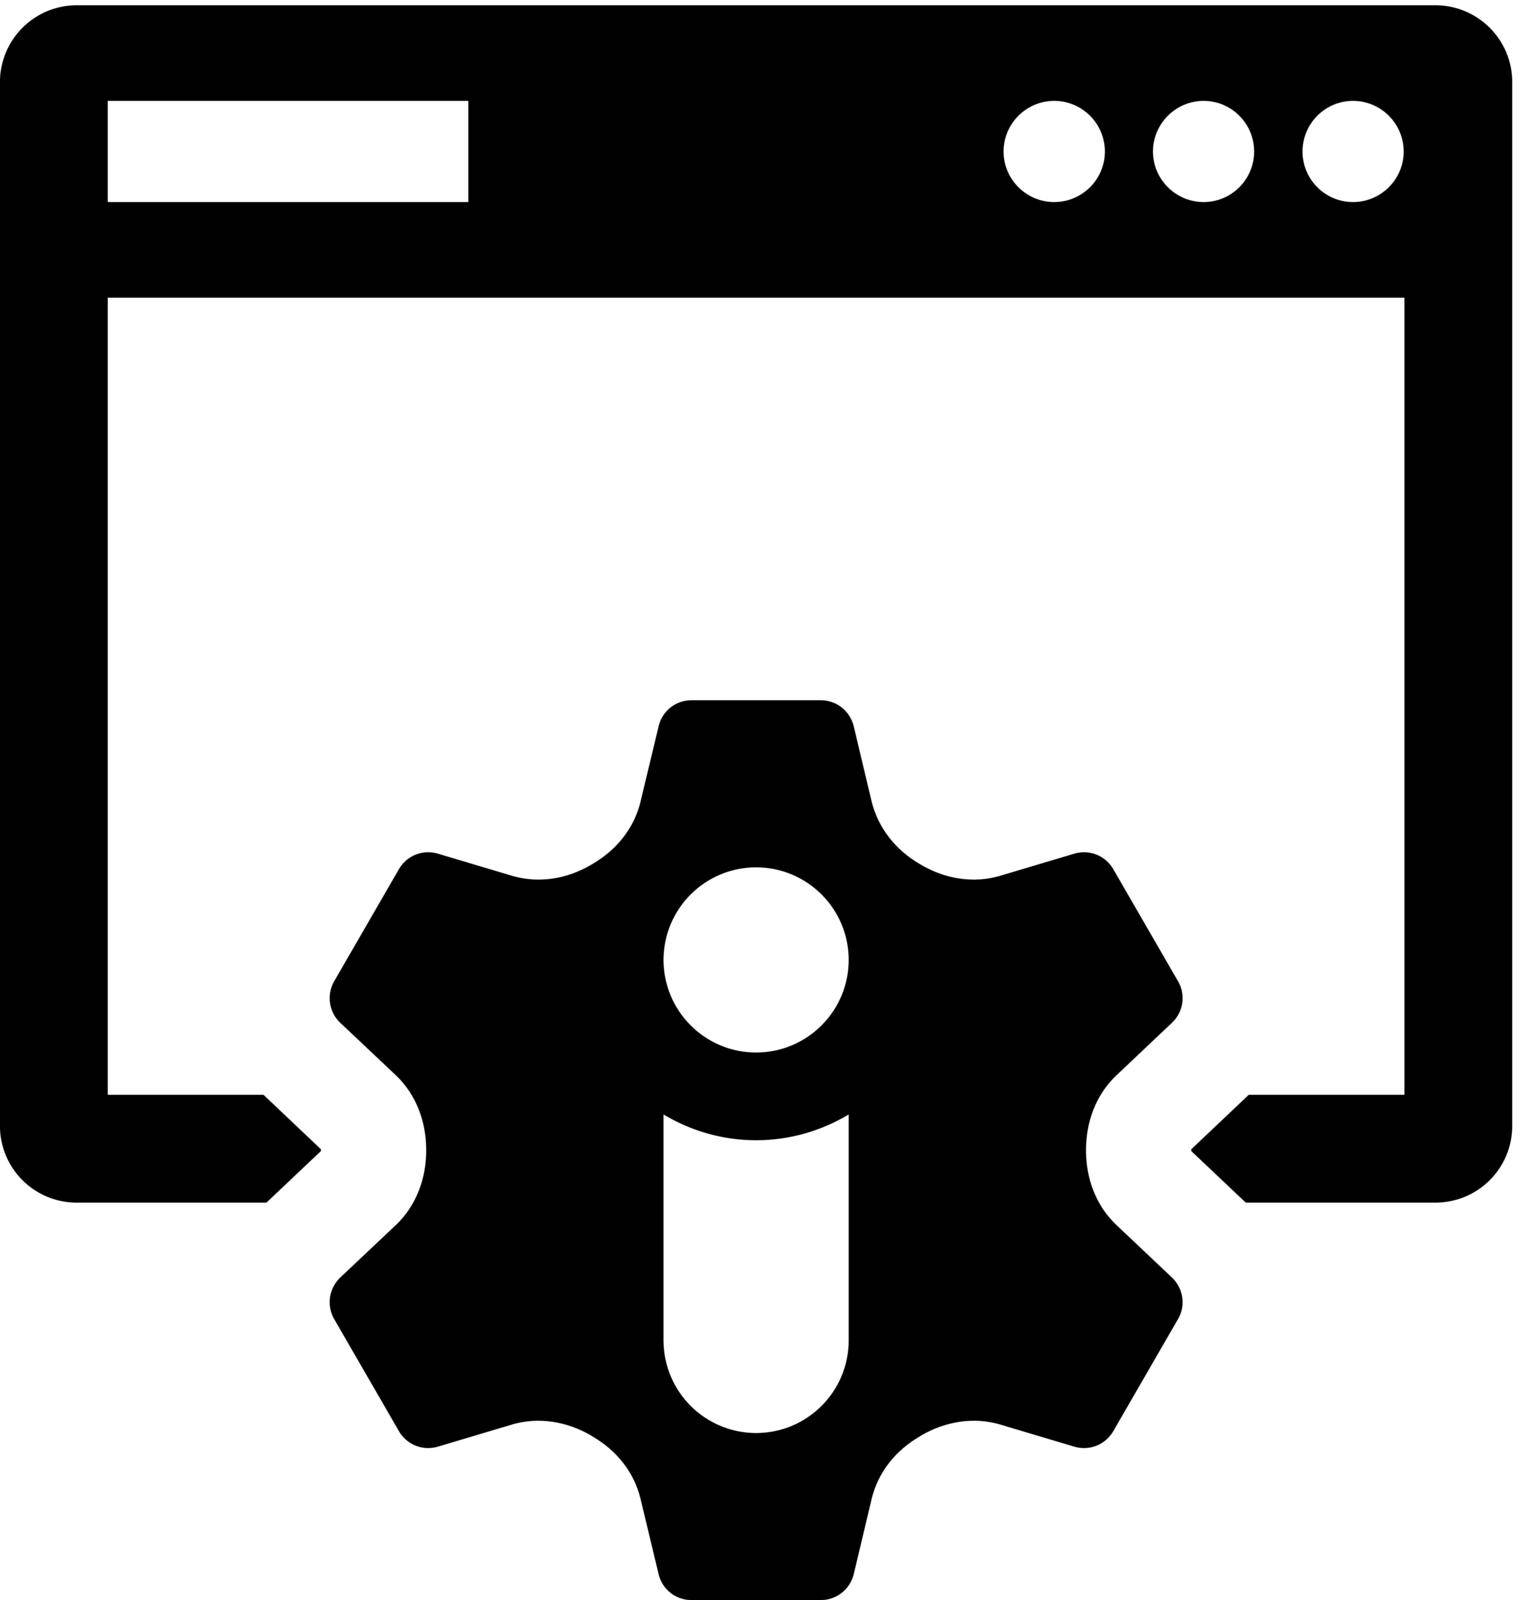 Web instruction icon by delwar018